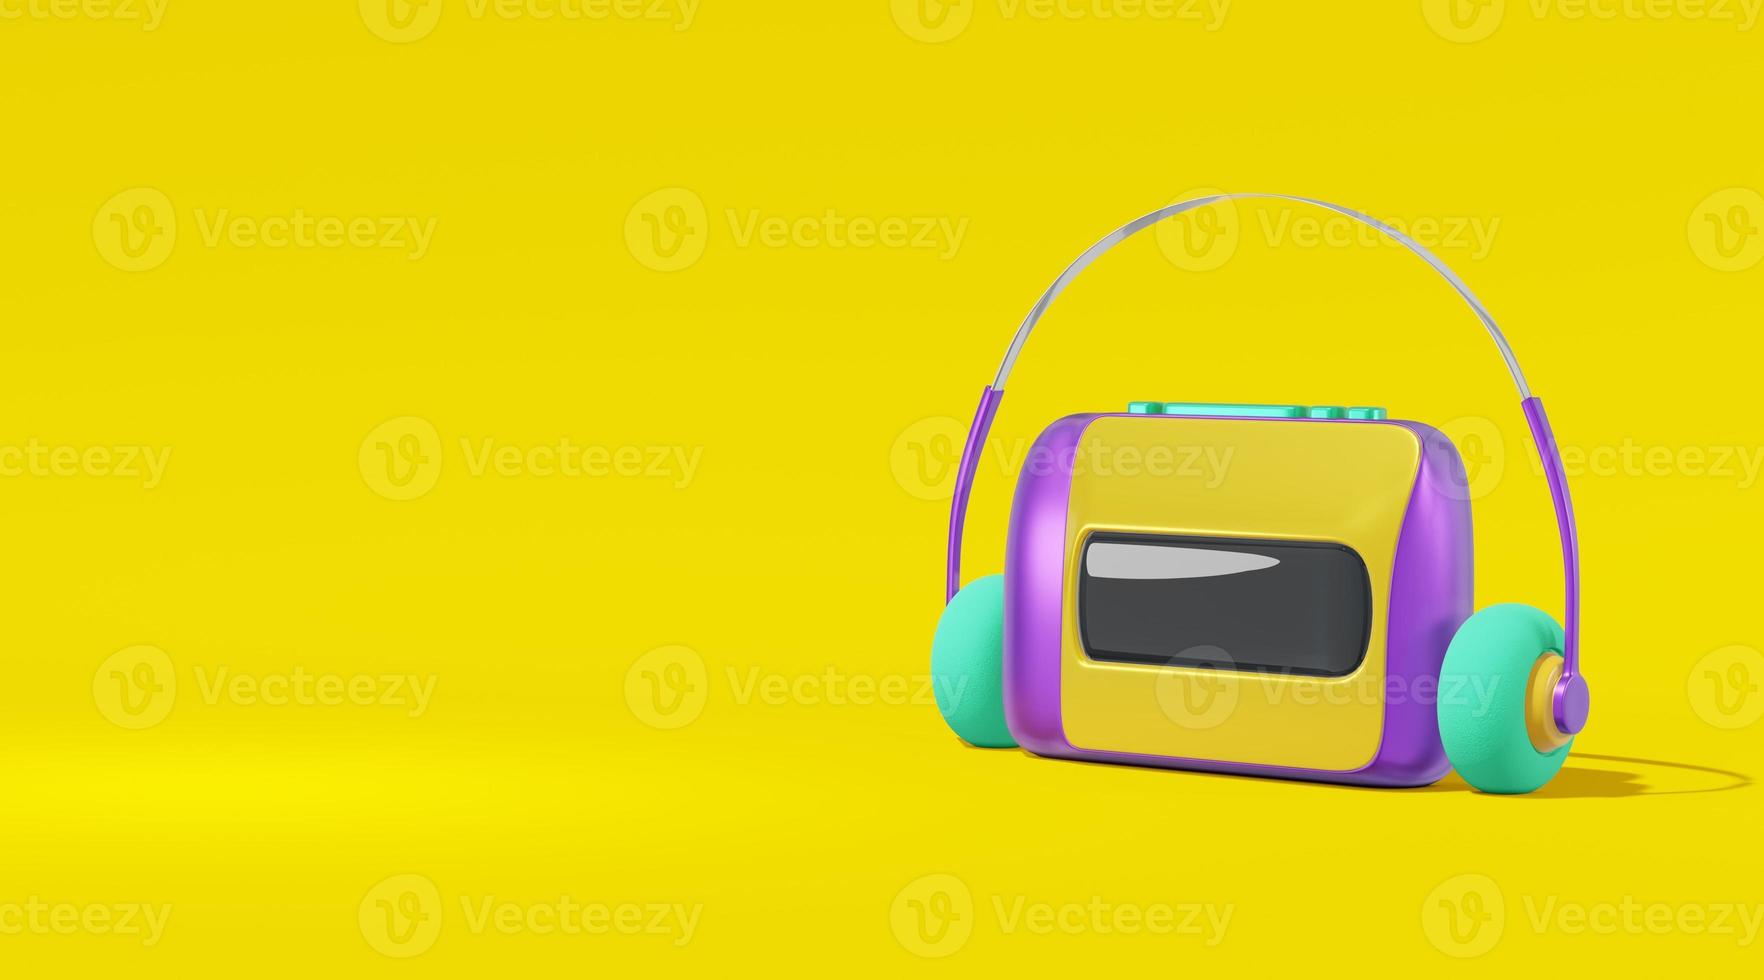 Audio player cassette cartoon style yellow background. Realistic concept toy tape recorder, headphones purple, green text space illustration. 3D rendering photo